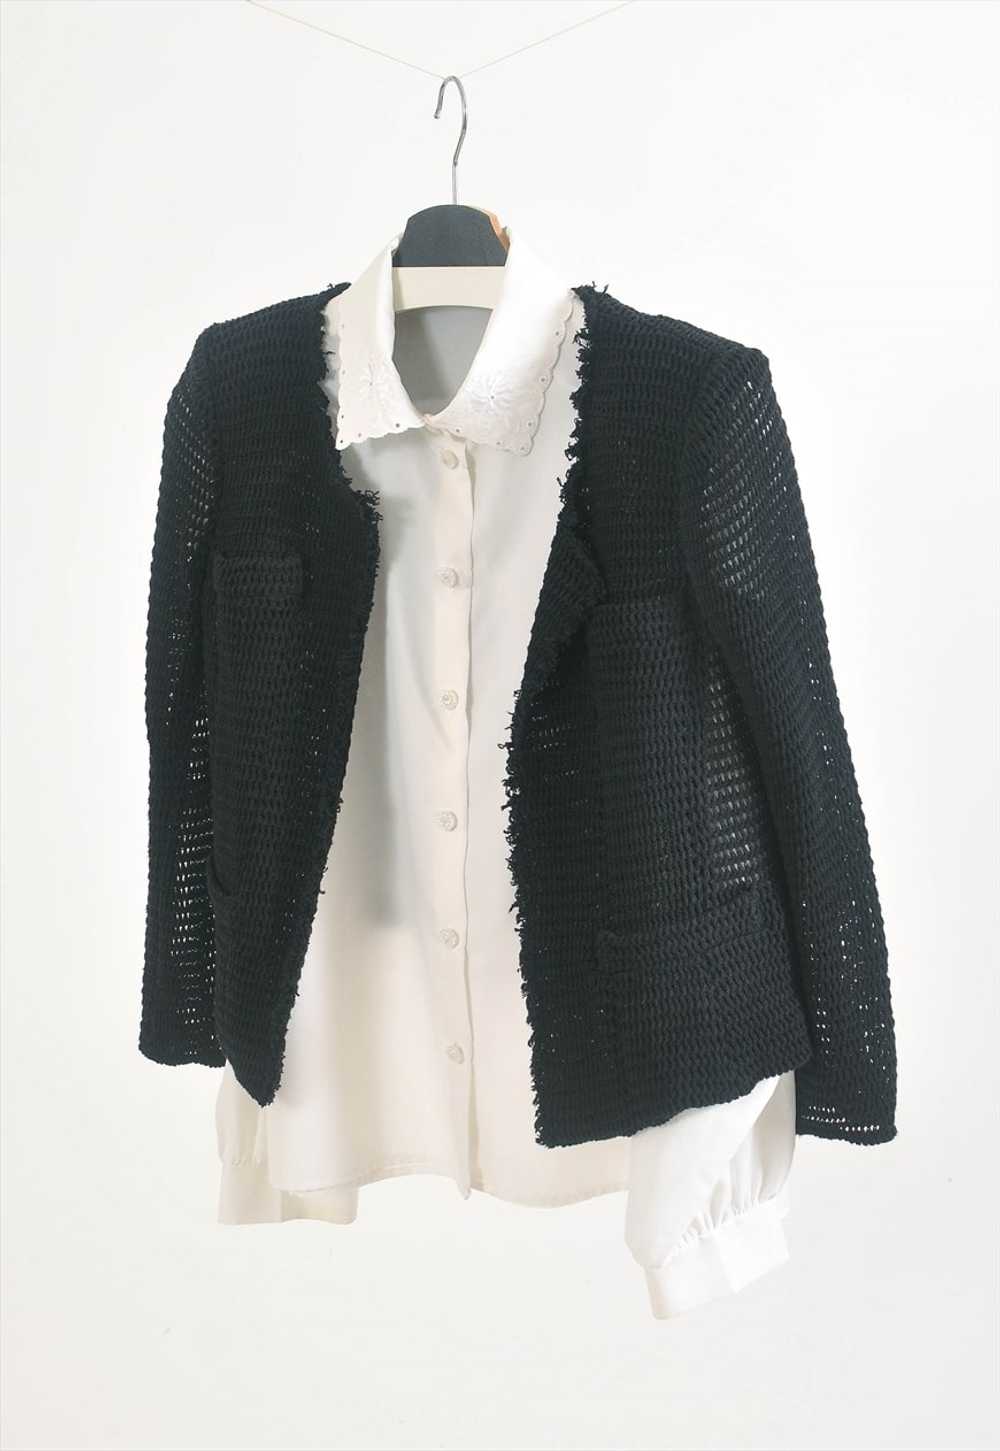 Vintage 90s open front crocheted jacket - image 4